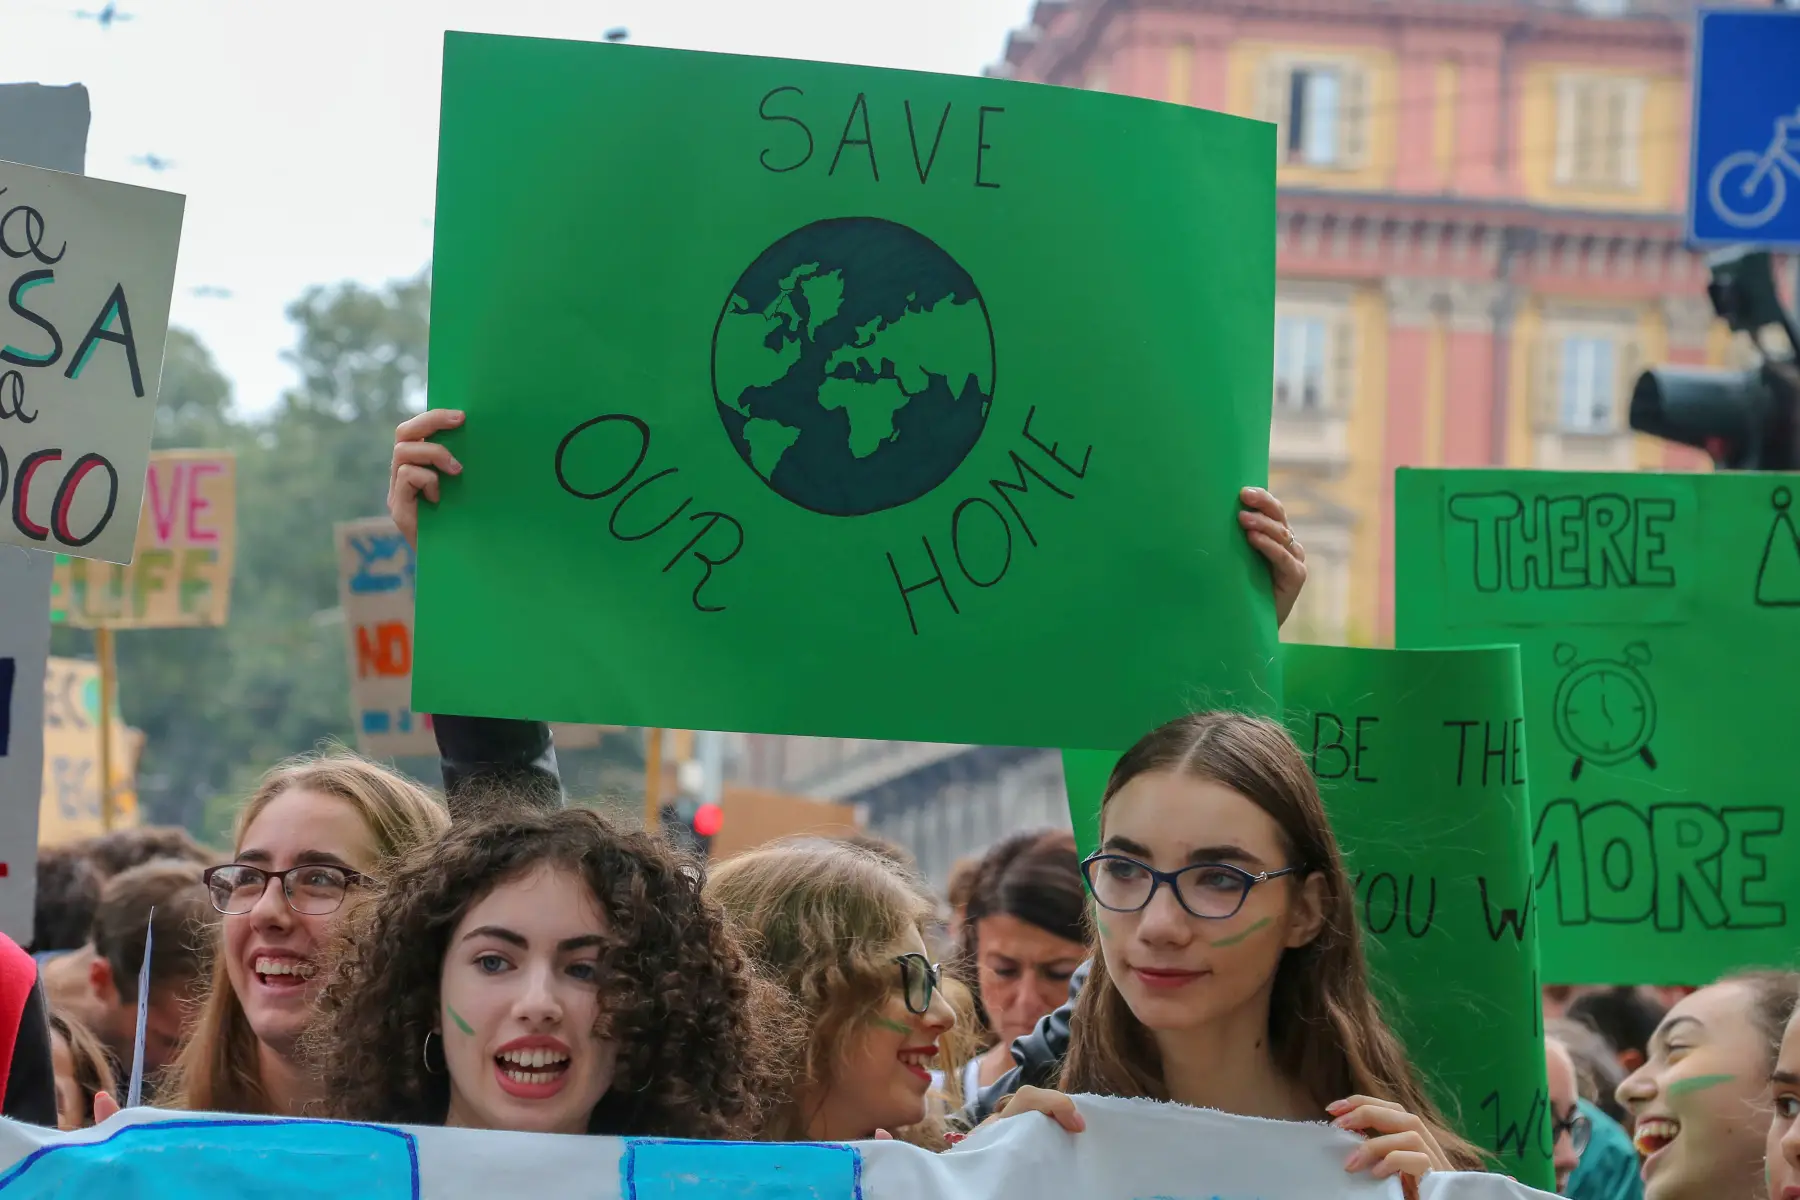 Two teenagers at the 2019 Fridays For Future Climate protest in Torino ( Italy), holding a sign that says 